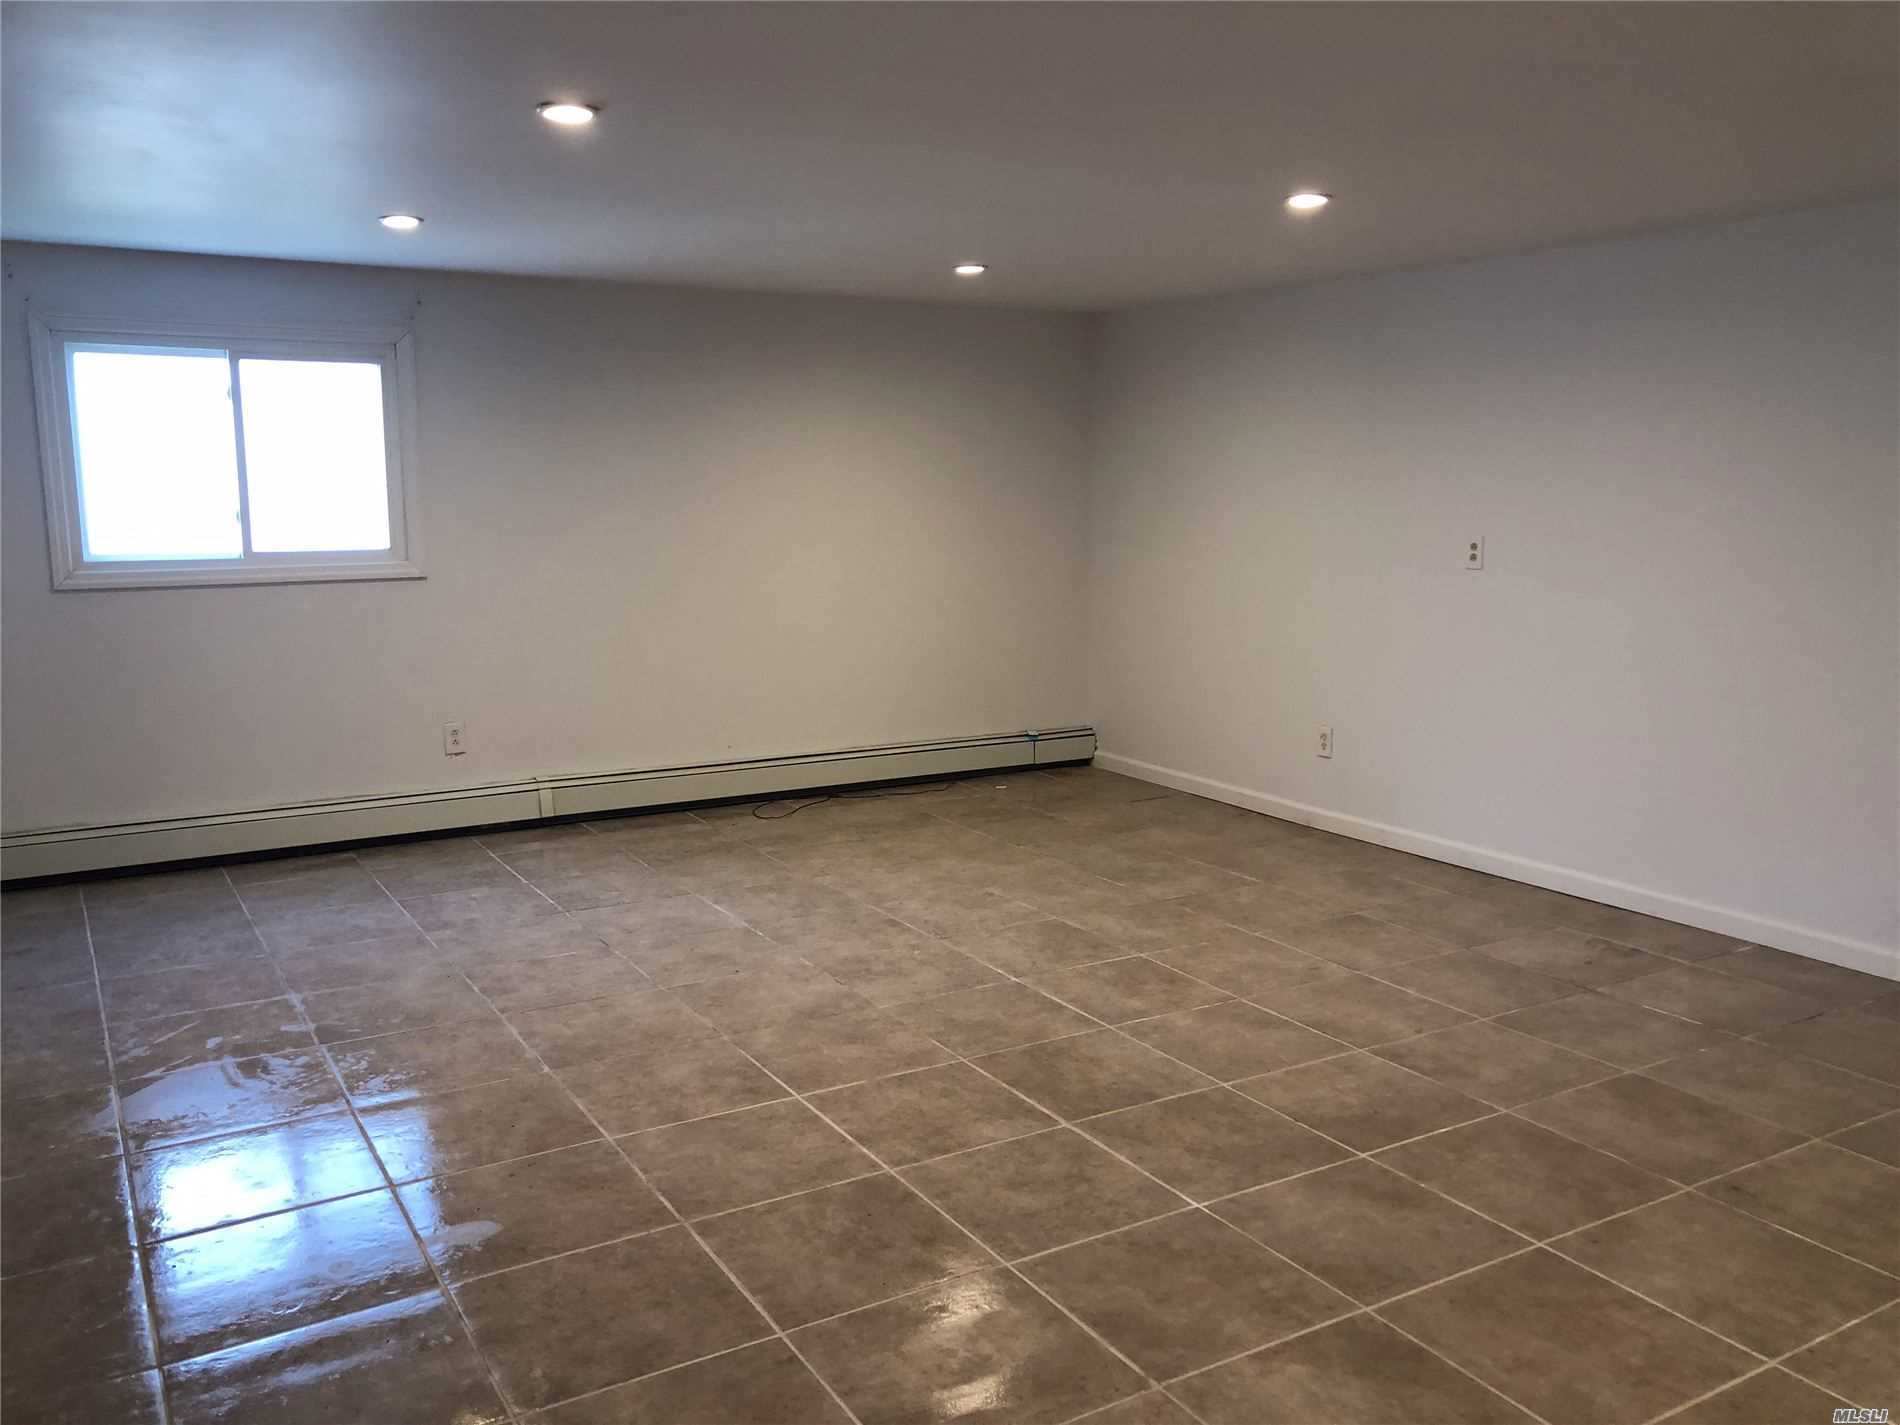 Gorgeous/spacious 1 bedroom living quarters fully renovated top to bottom. Open layout concept with Stainless steel appliances, master bedroom with full walk in closet, updated bathroom and last but definitely not least you can walk to Baldwin Park! This will not LAST!